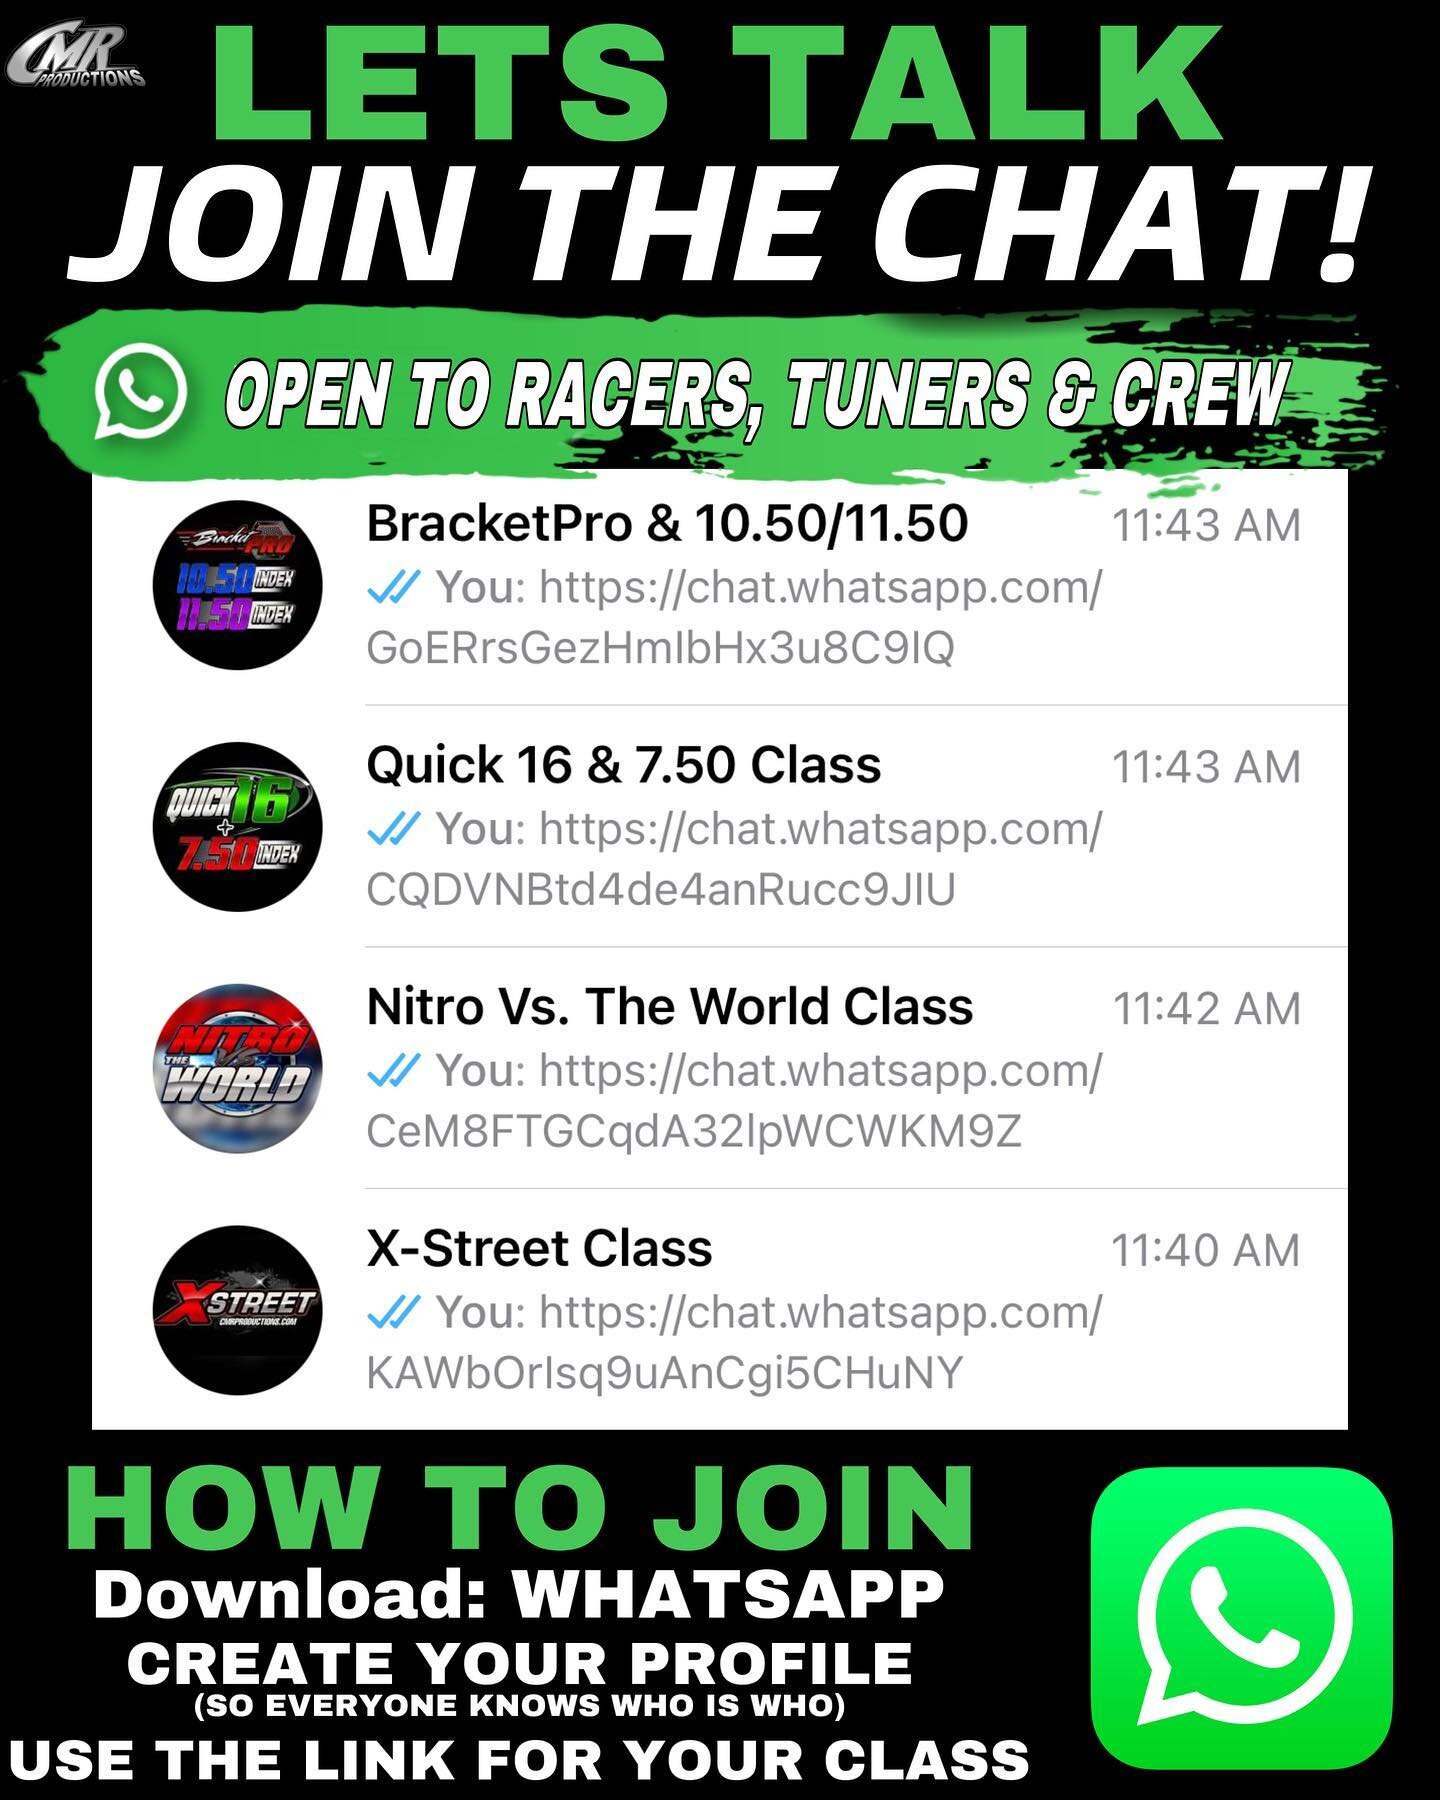 Let&rsquo;s Talk About It! 

We have created a Group Chat for Class specific Racers, Tuners and Crew members. We believe these chats will create better communication, help us take in and provide feedback, as well as allow people to just speak freely!